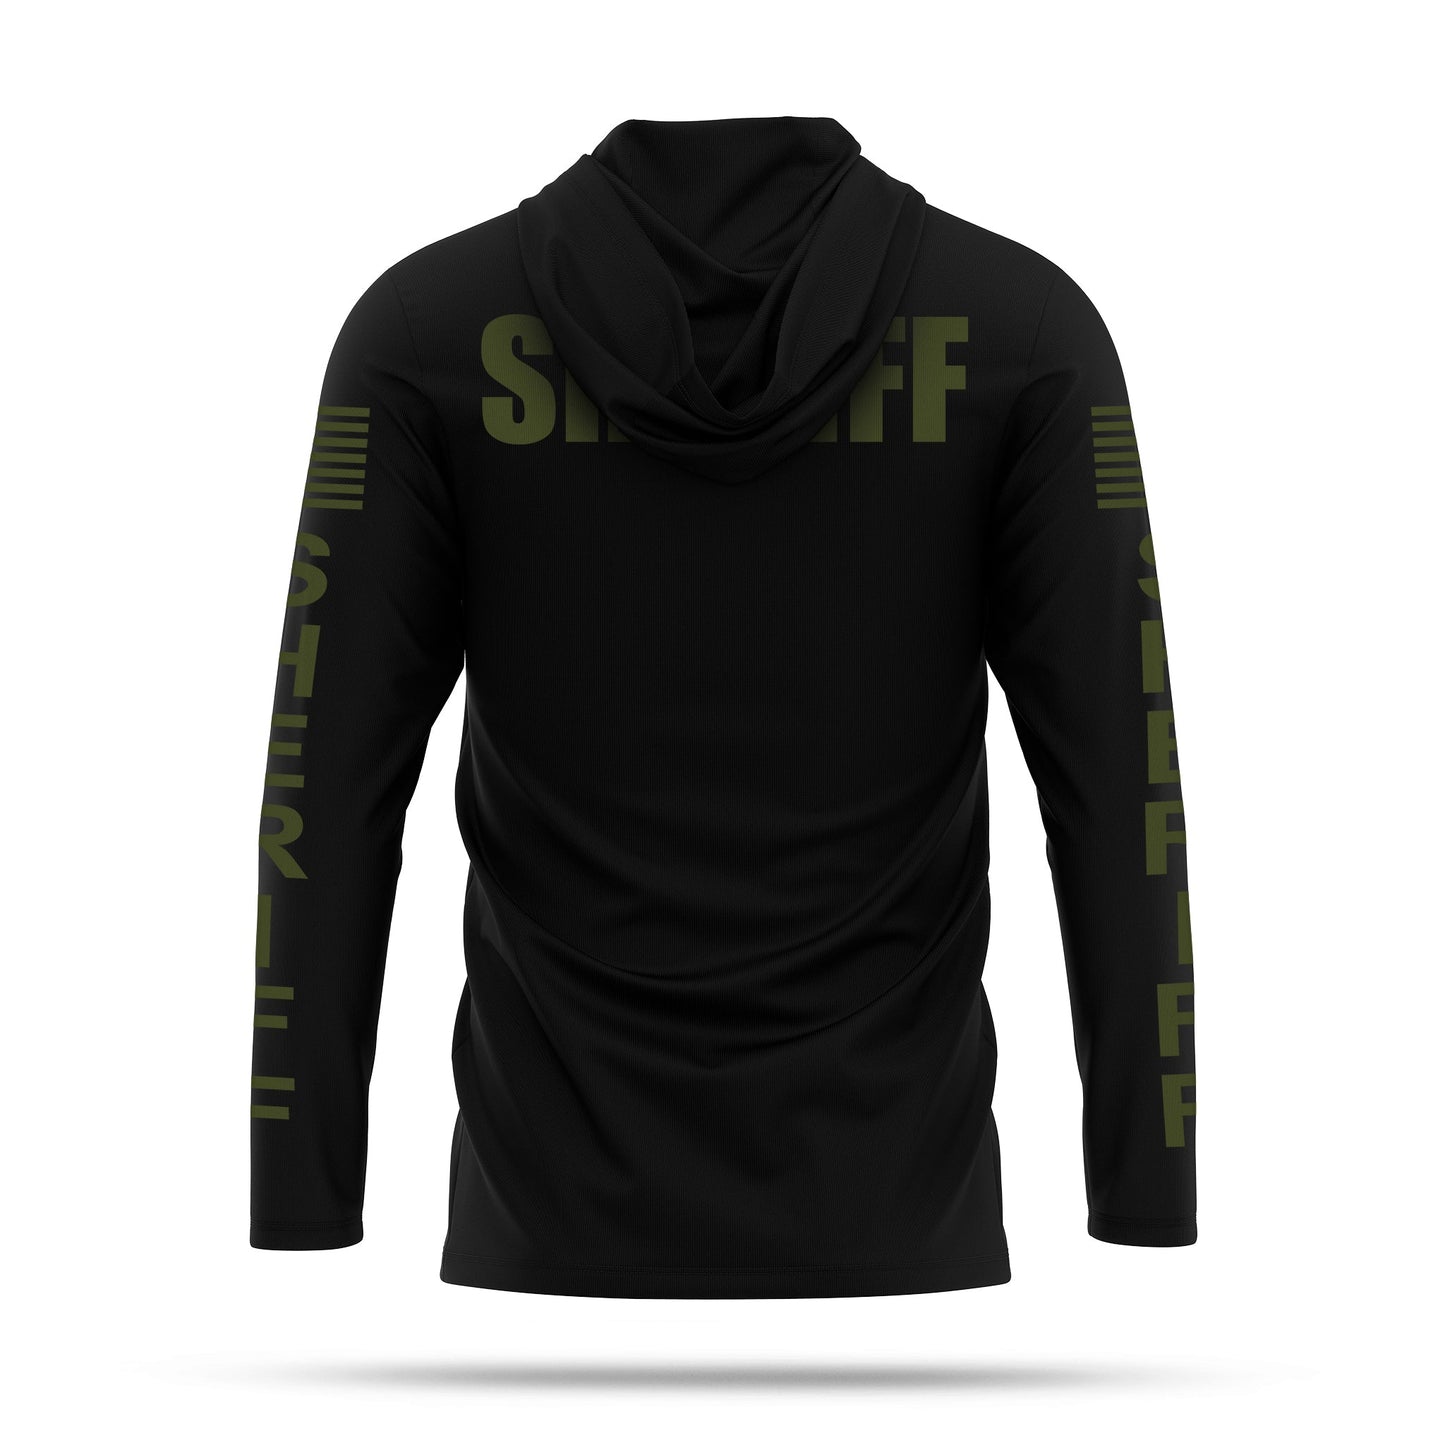 [SHERIFF] Men's Performance Hooded Long Sleeve [BLK/GRN]-13 Fifty Apparel